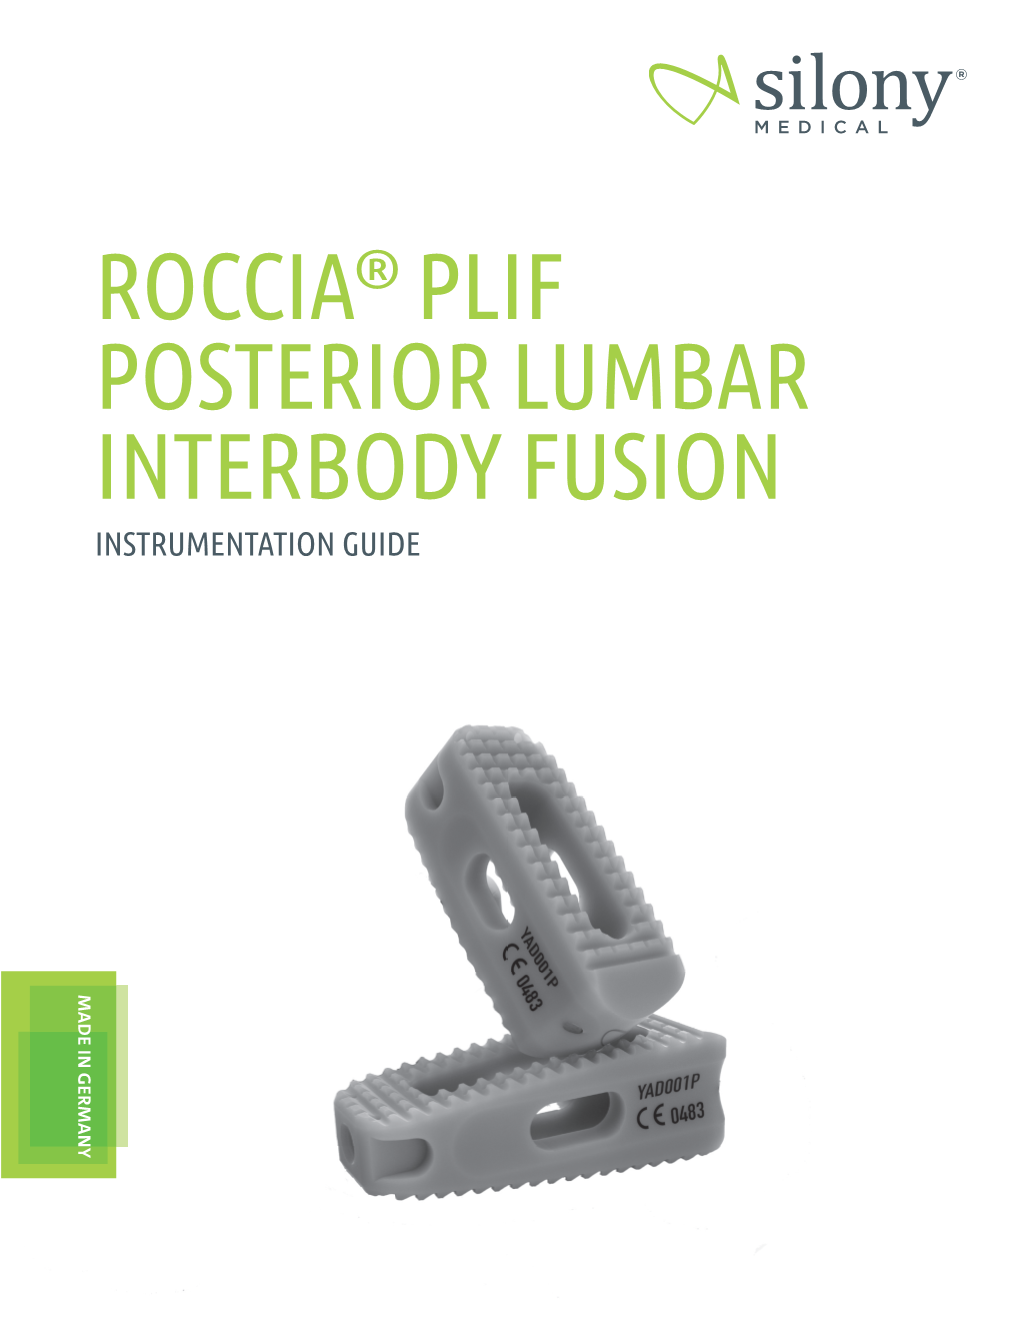 Roccia® Plif Posterior Lumbar Interbody Fusion Instrumentation Guide Made Germany in Table of Contents